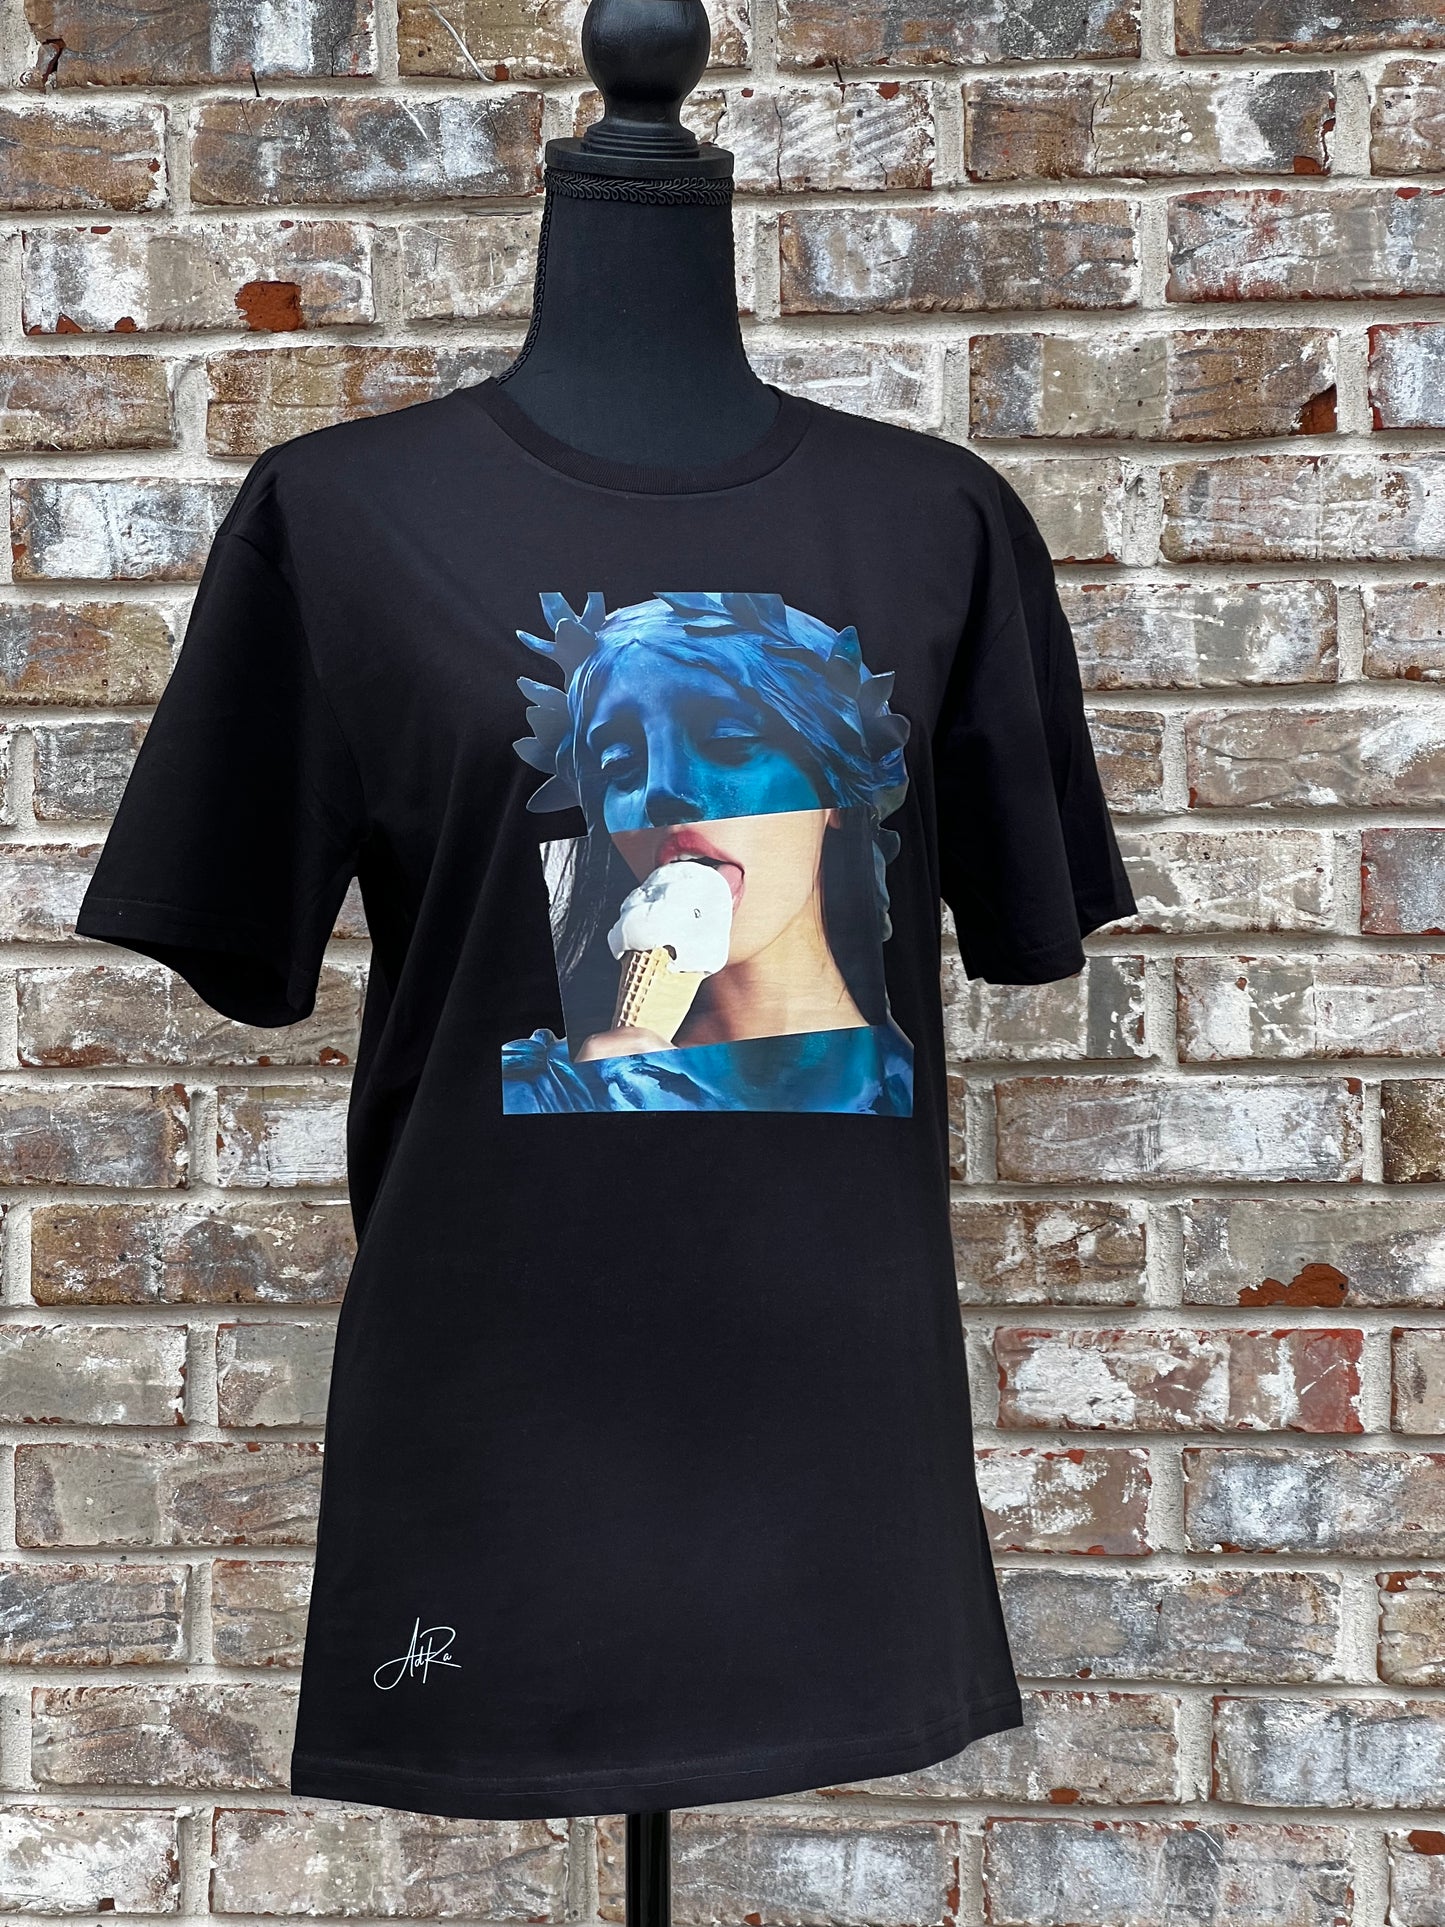 Feel Young and Stylish with Our Exclusive Women's Ice Cream Licking Sexy Design T-Shirt | Adra Apparel